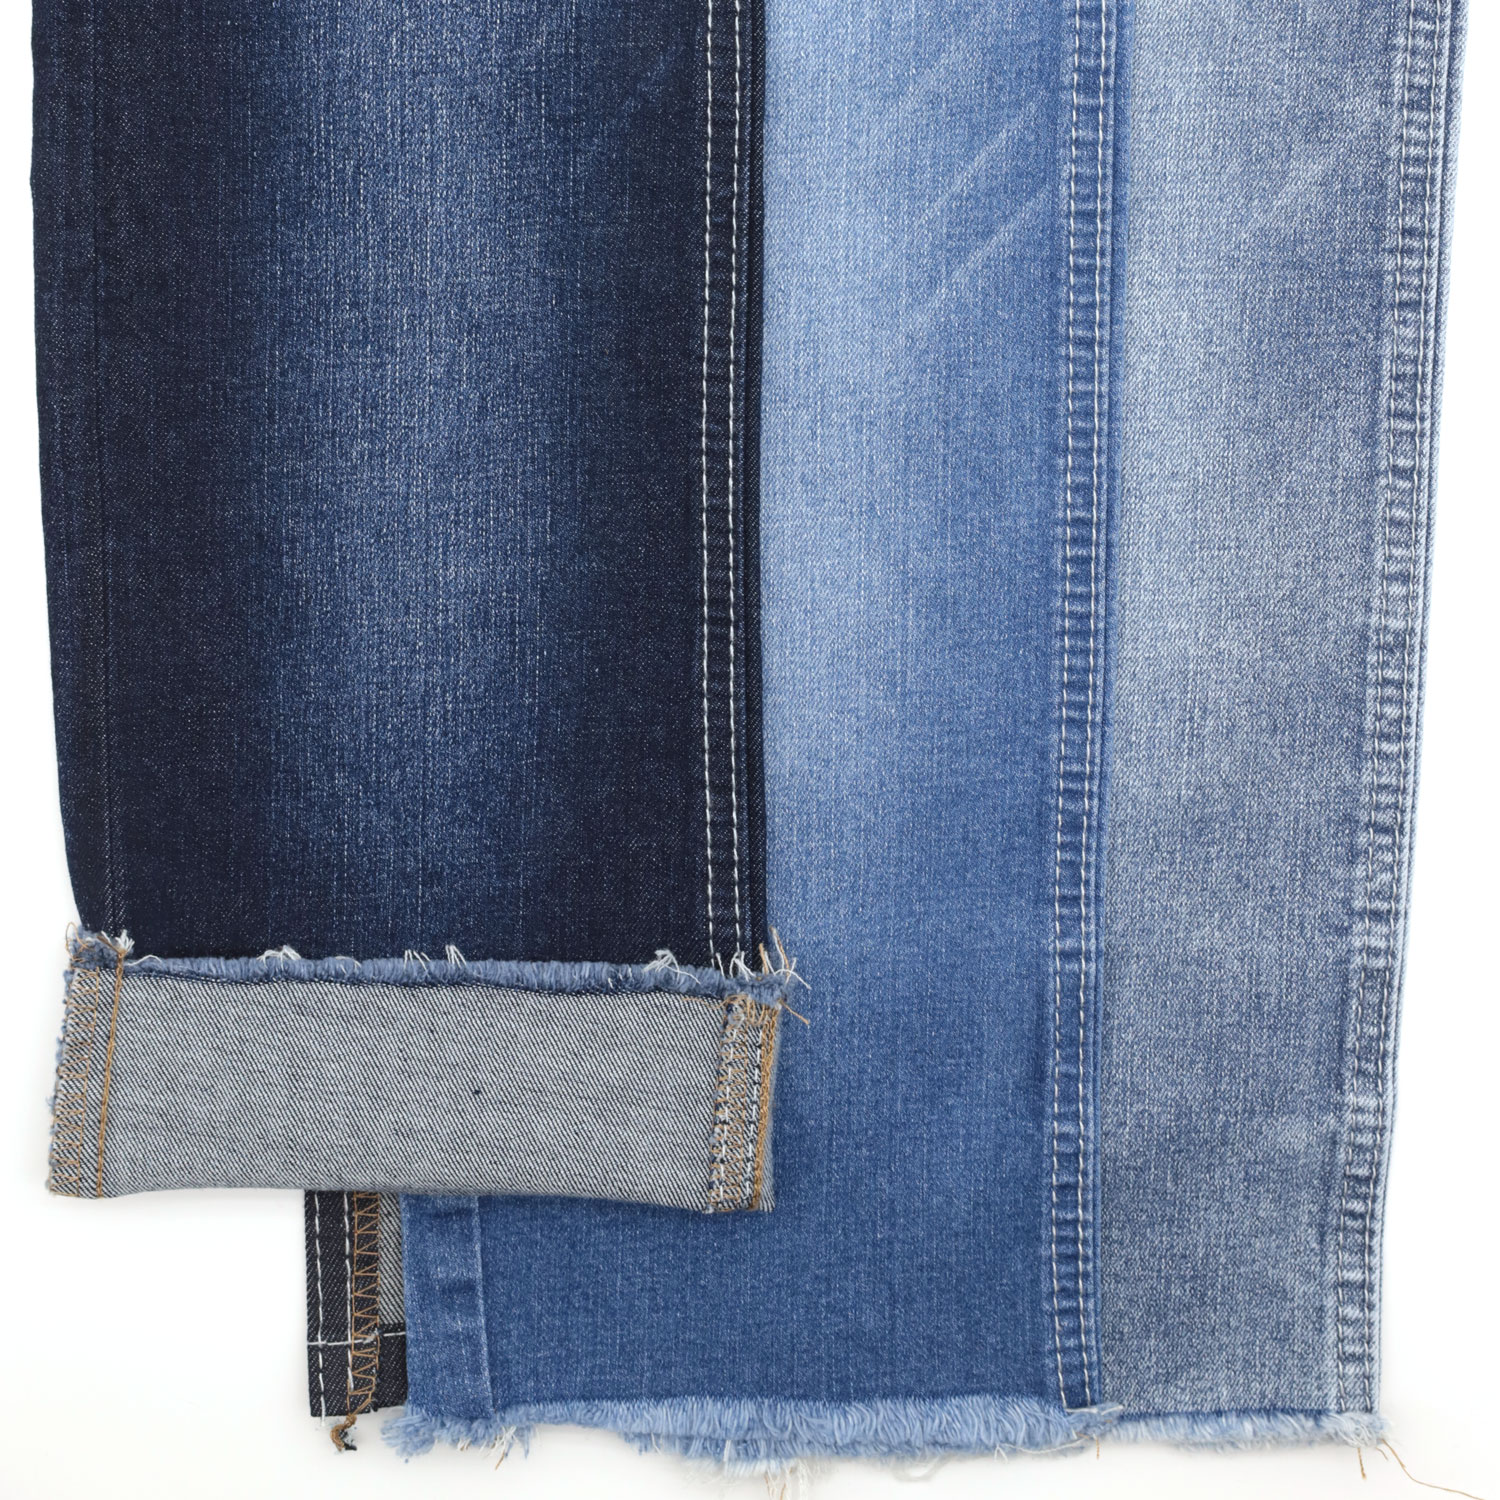 5 Top Tips When It Comes to China Denim Fabric 1